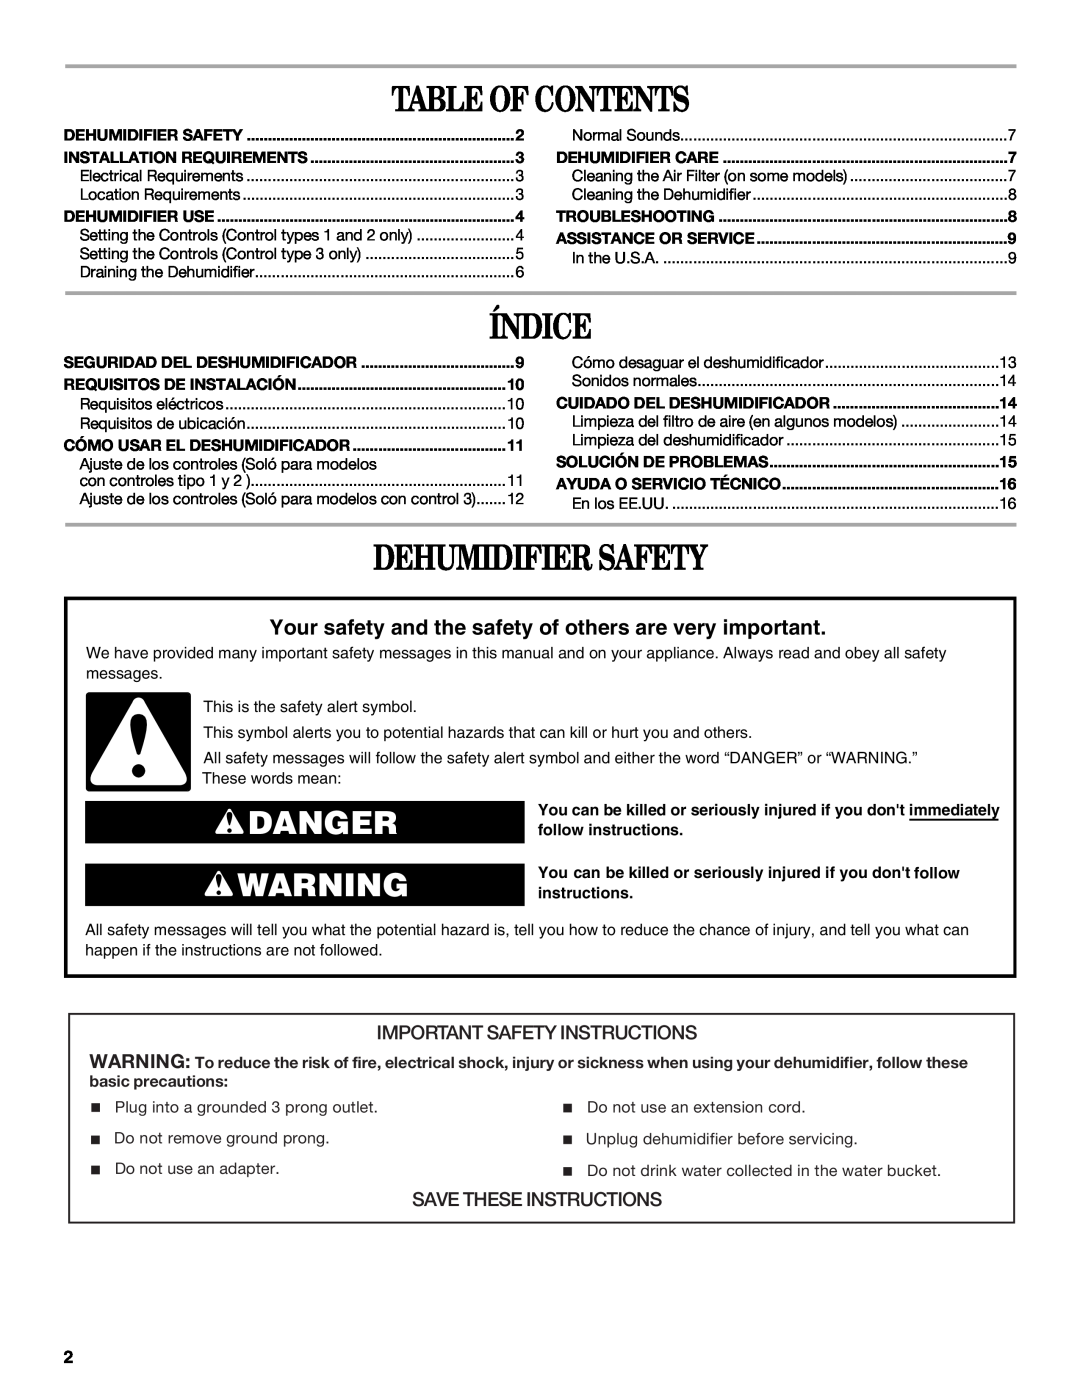 Whirlpool AD35DSS0 manual Table Of Contents, Índice, Dehumidifier Safety, Danger, Important Safety Instructions 